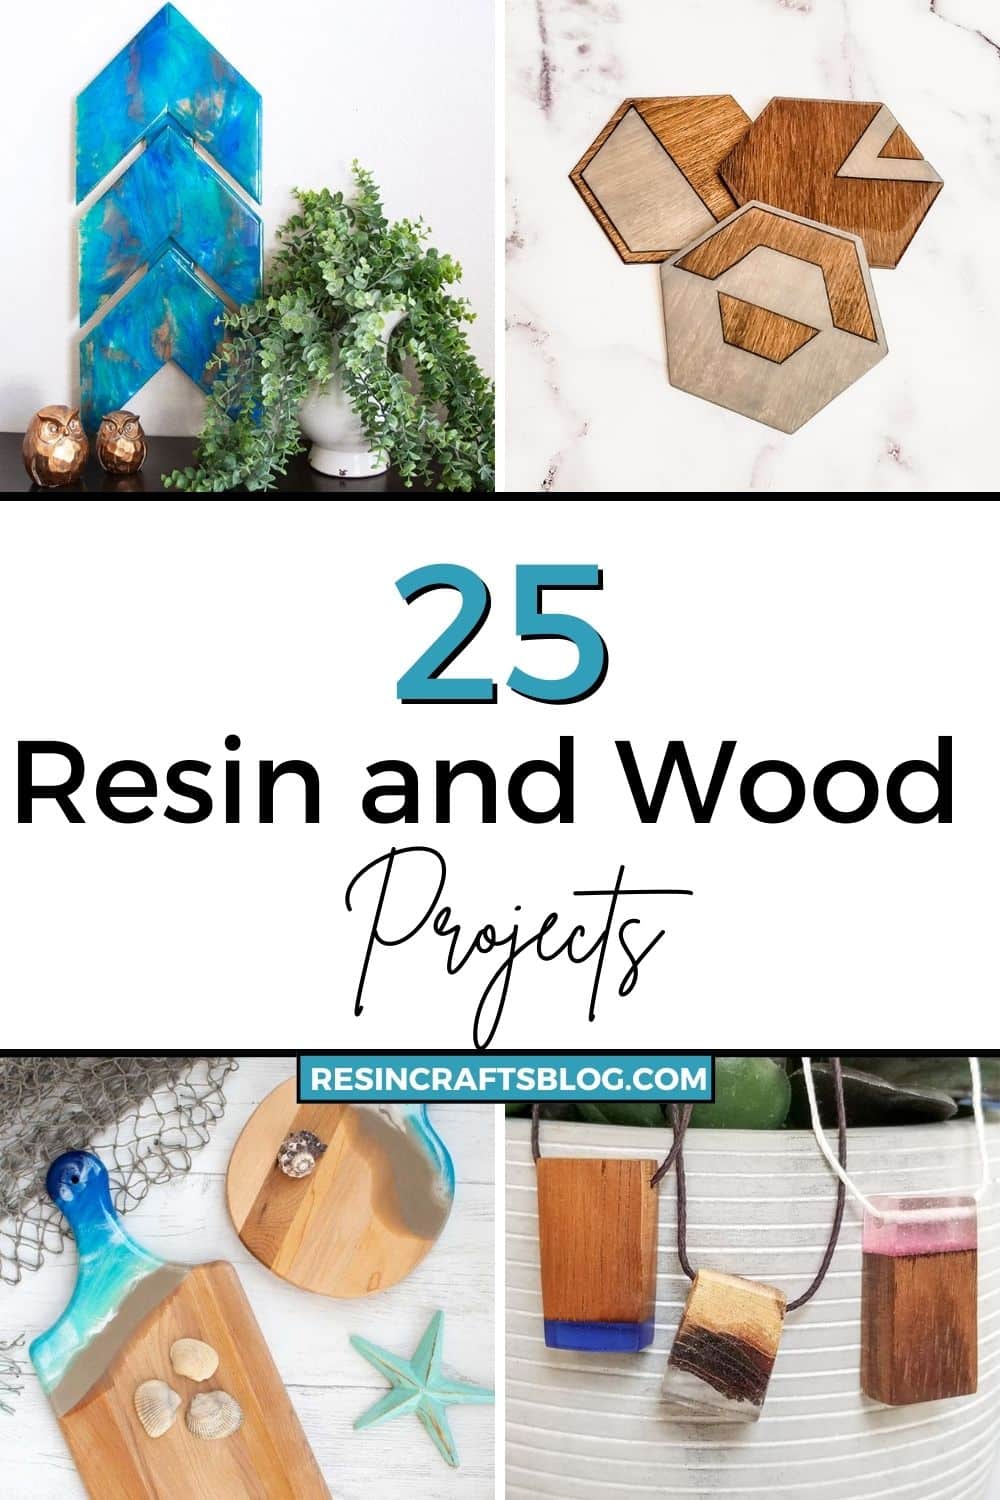 This simple guide will show you 25 beautiful resin and wood projects that are perfect for either a beginner or an experienced crafter. #resinwithwoodprojects #resincraftsblog #woodandresin #diyresincrafts via @resincraftsblog